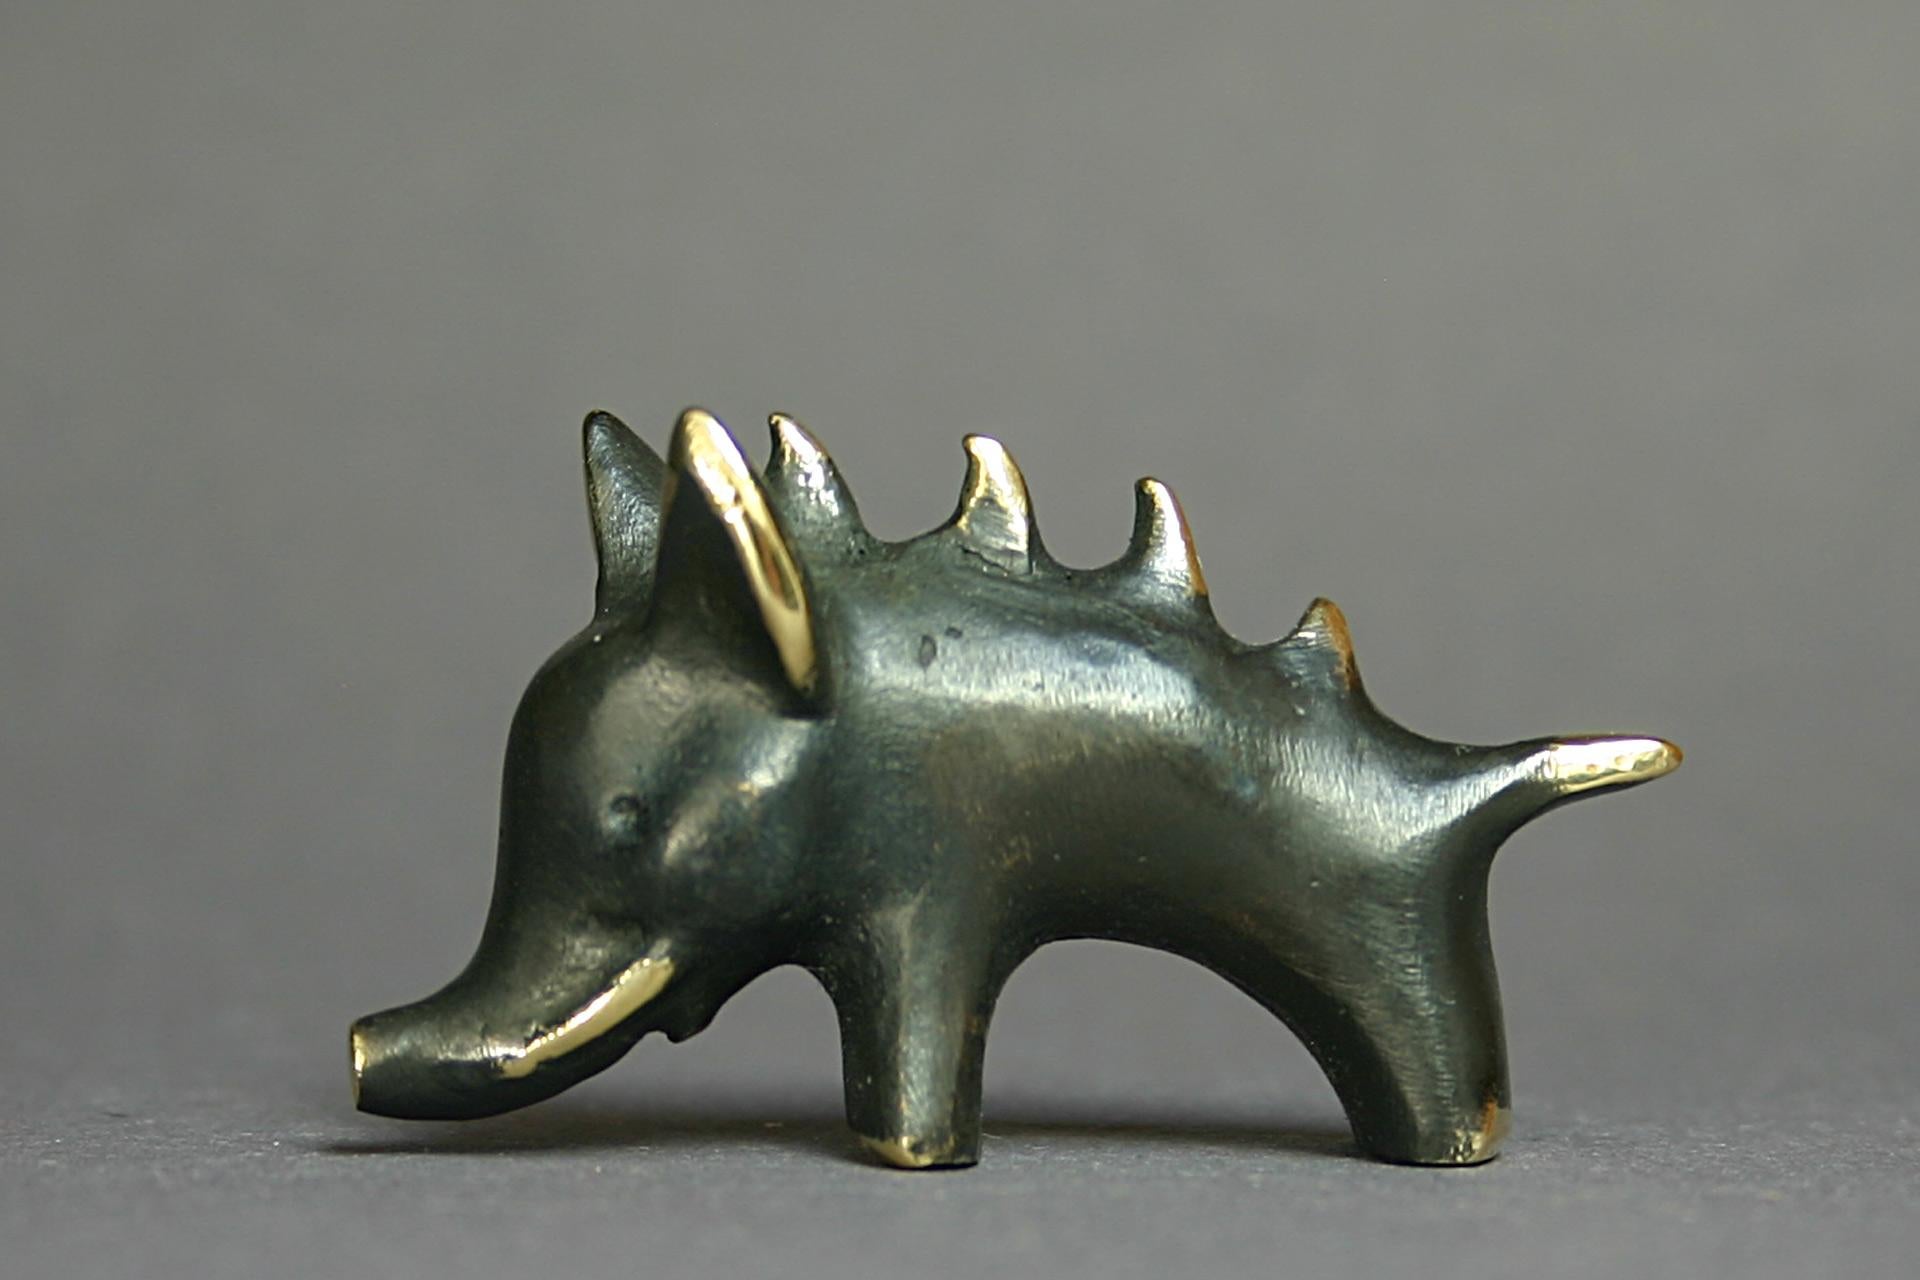 Boar. New production made in Austria. The figurine is special in its own way and requires 14 work steps. It is a 